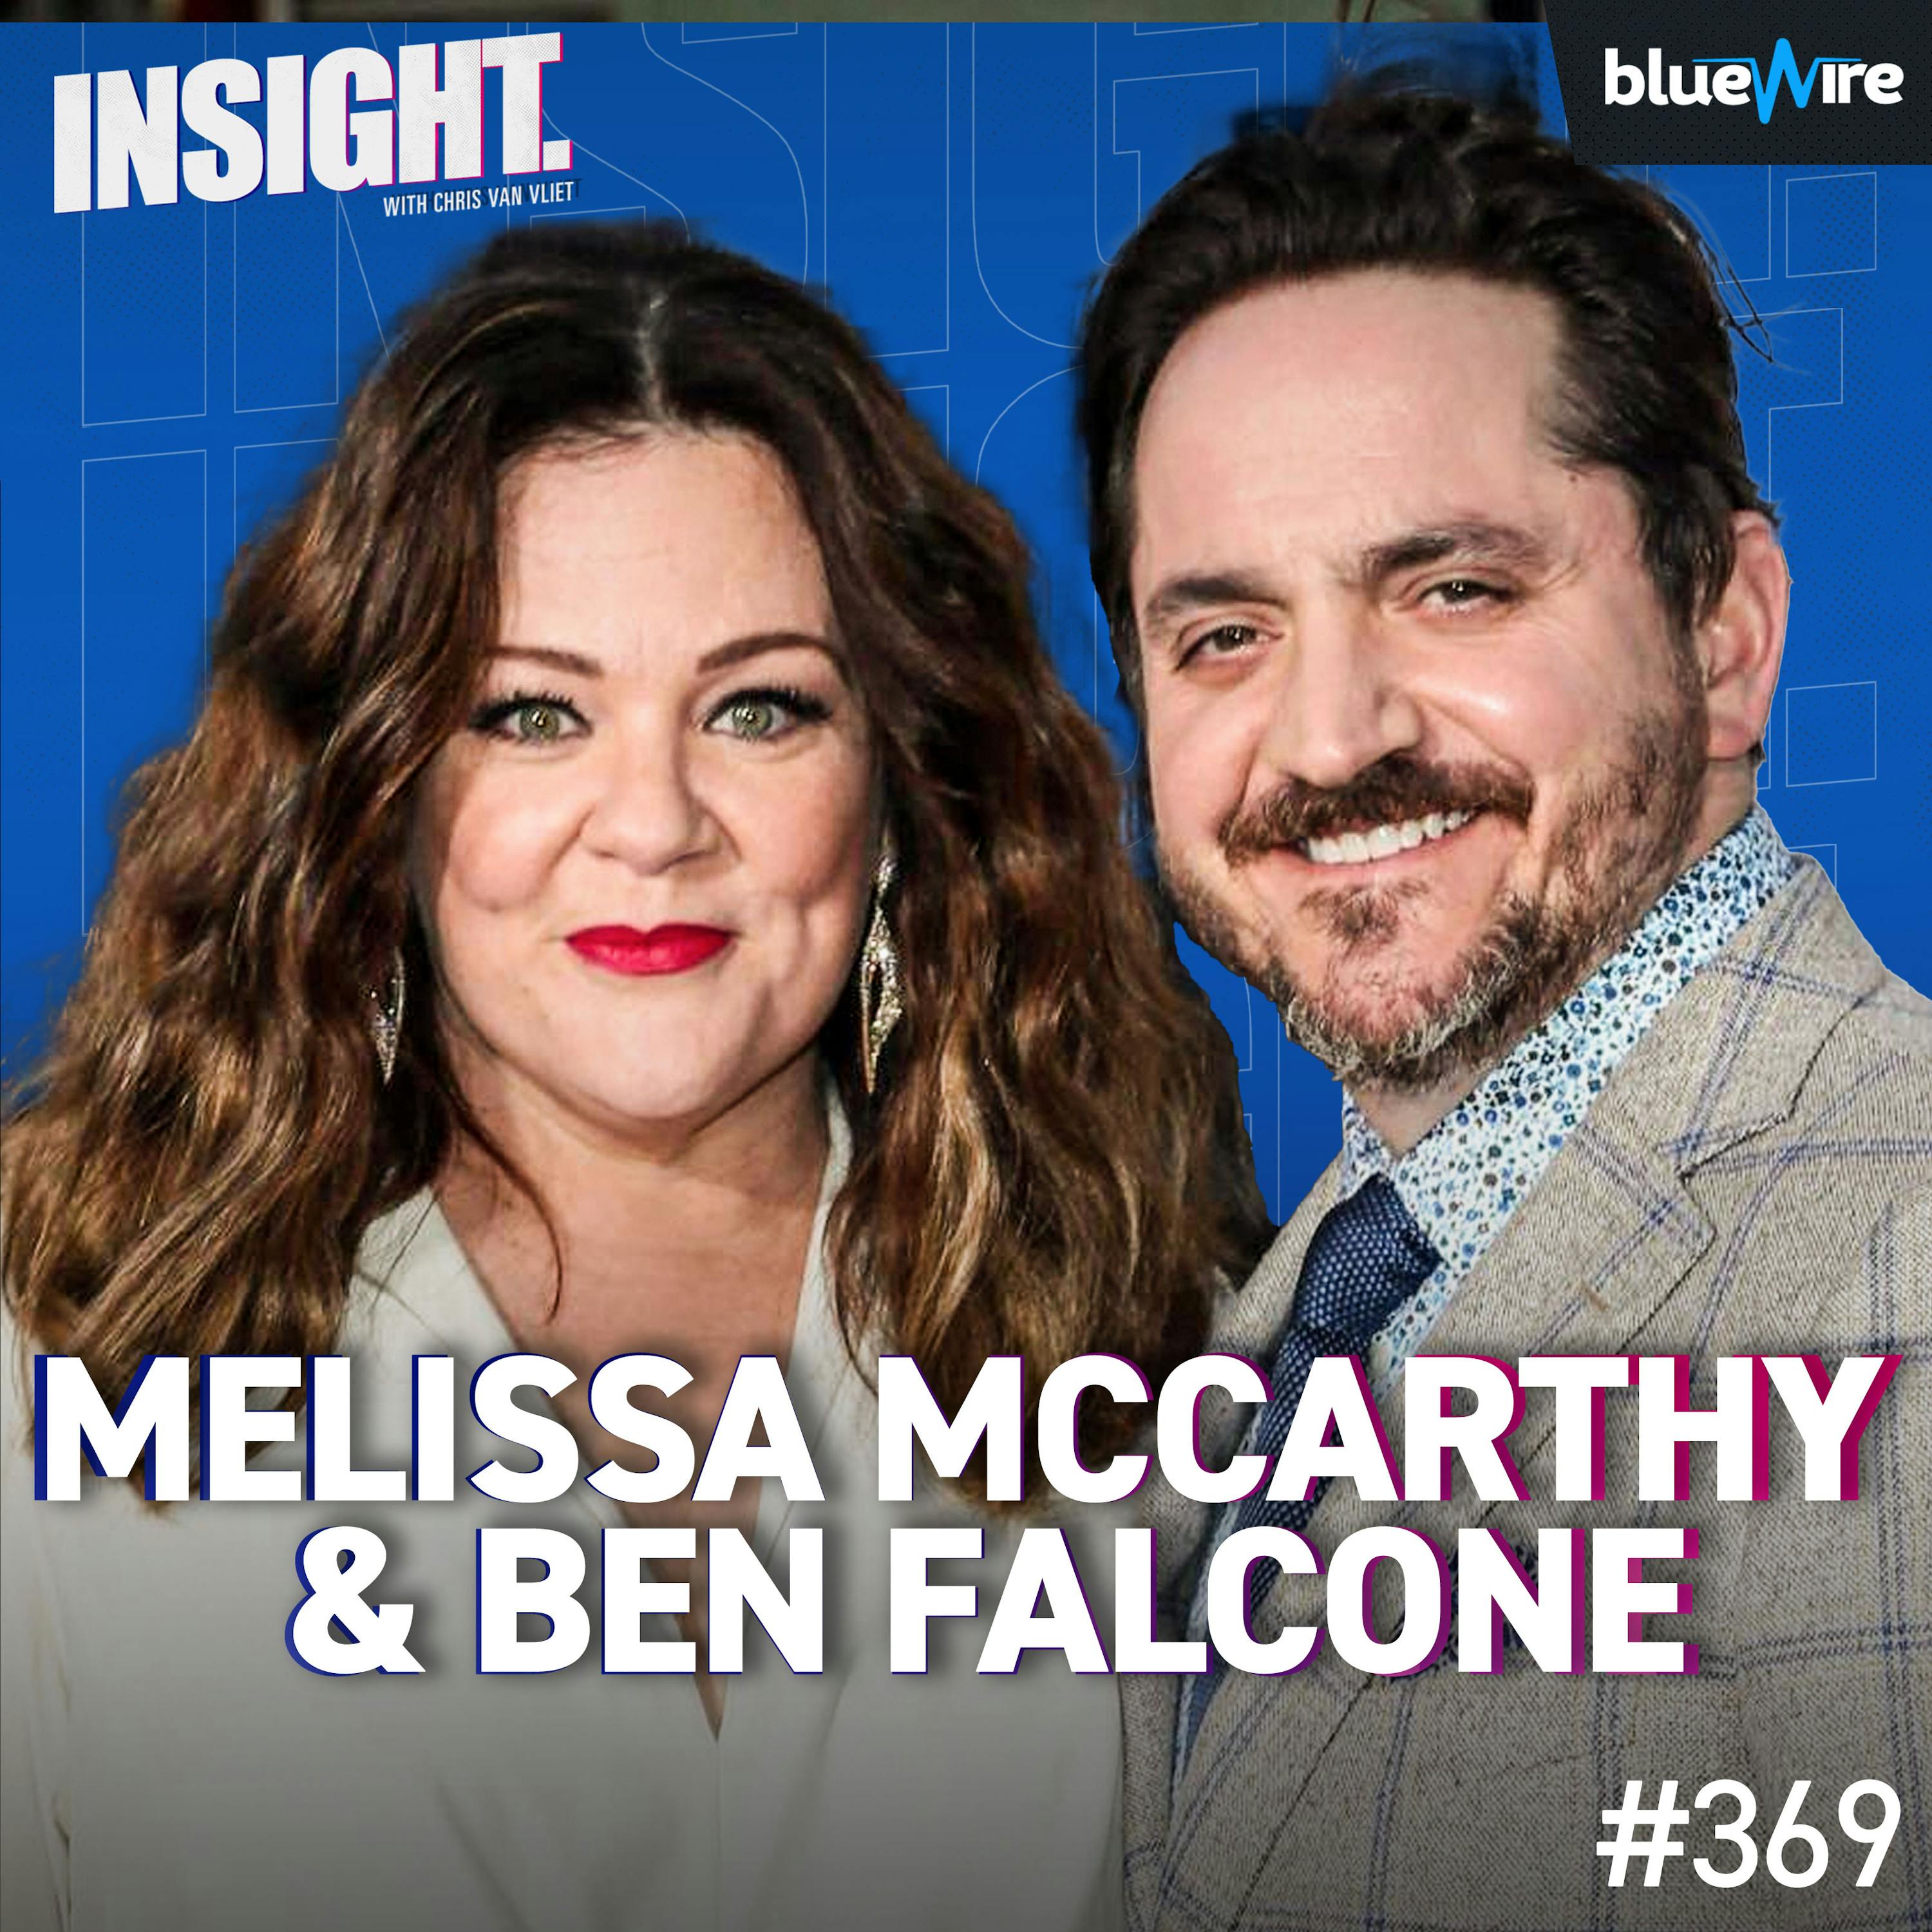 Melissa McCarthy & Ben Falcone - From BRIDESMAIDS to GOD'S FAVORITE IDIOT - Hollywood's Hilarious Power Couple Image